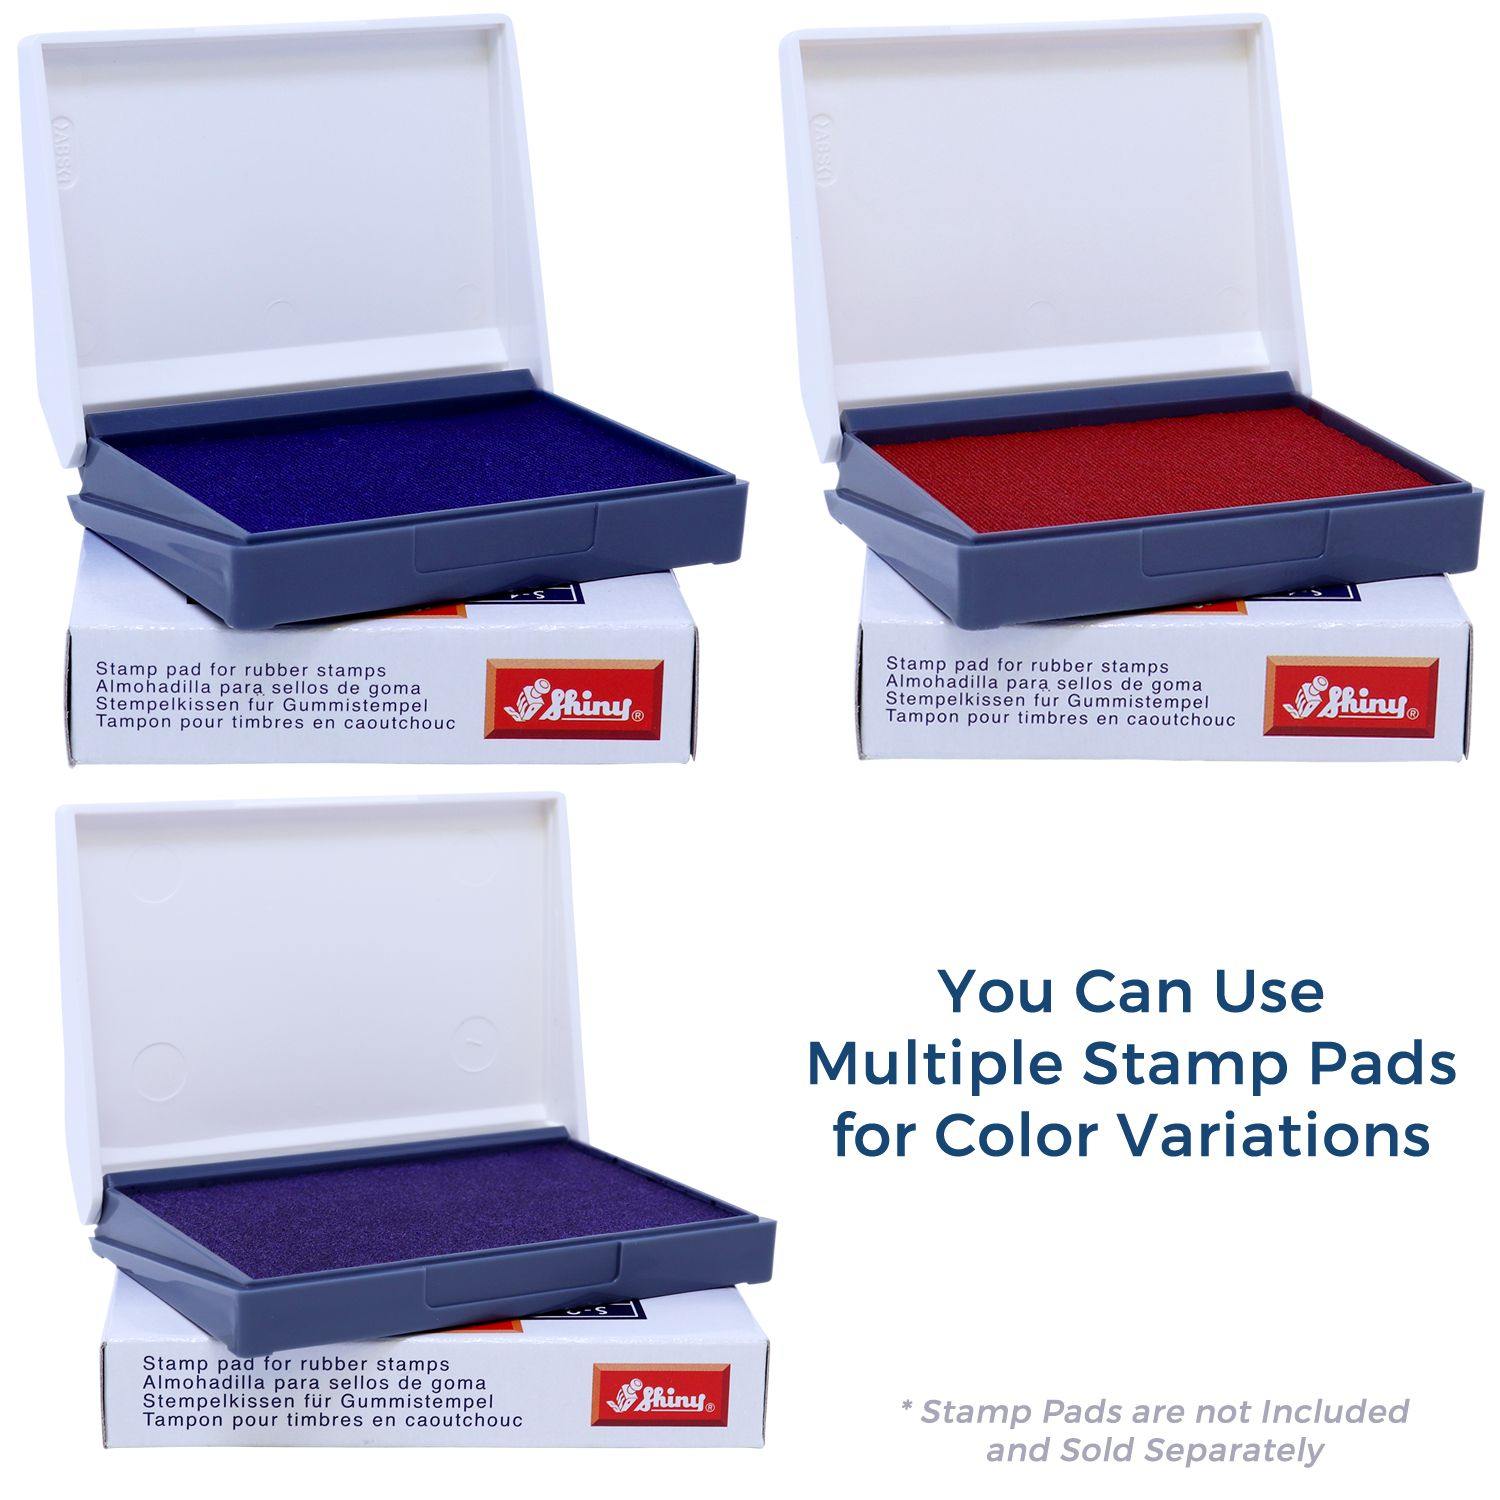 Stamp Pads for Large Narrow For Deposit Only Rubber Stamp Available